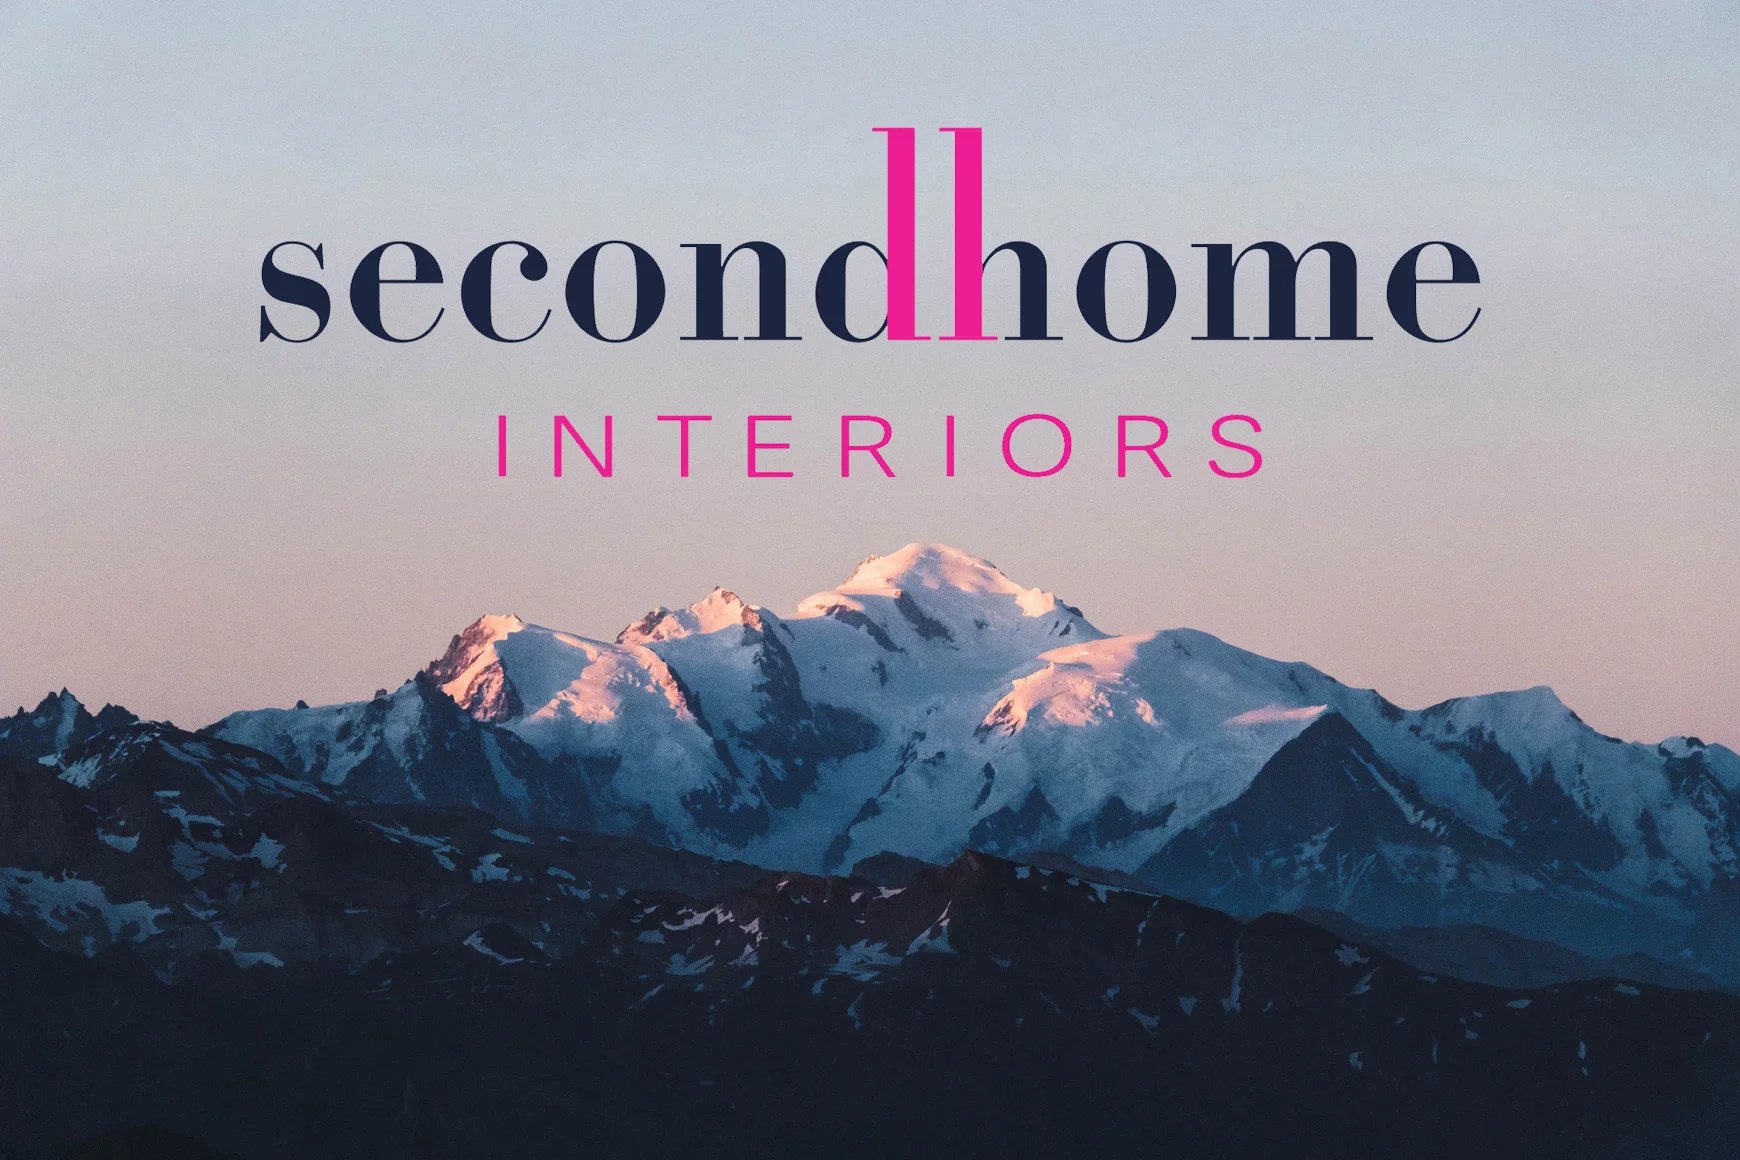 Secondhome Interiors: Our Service...